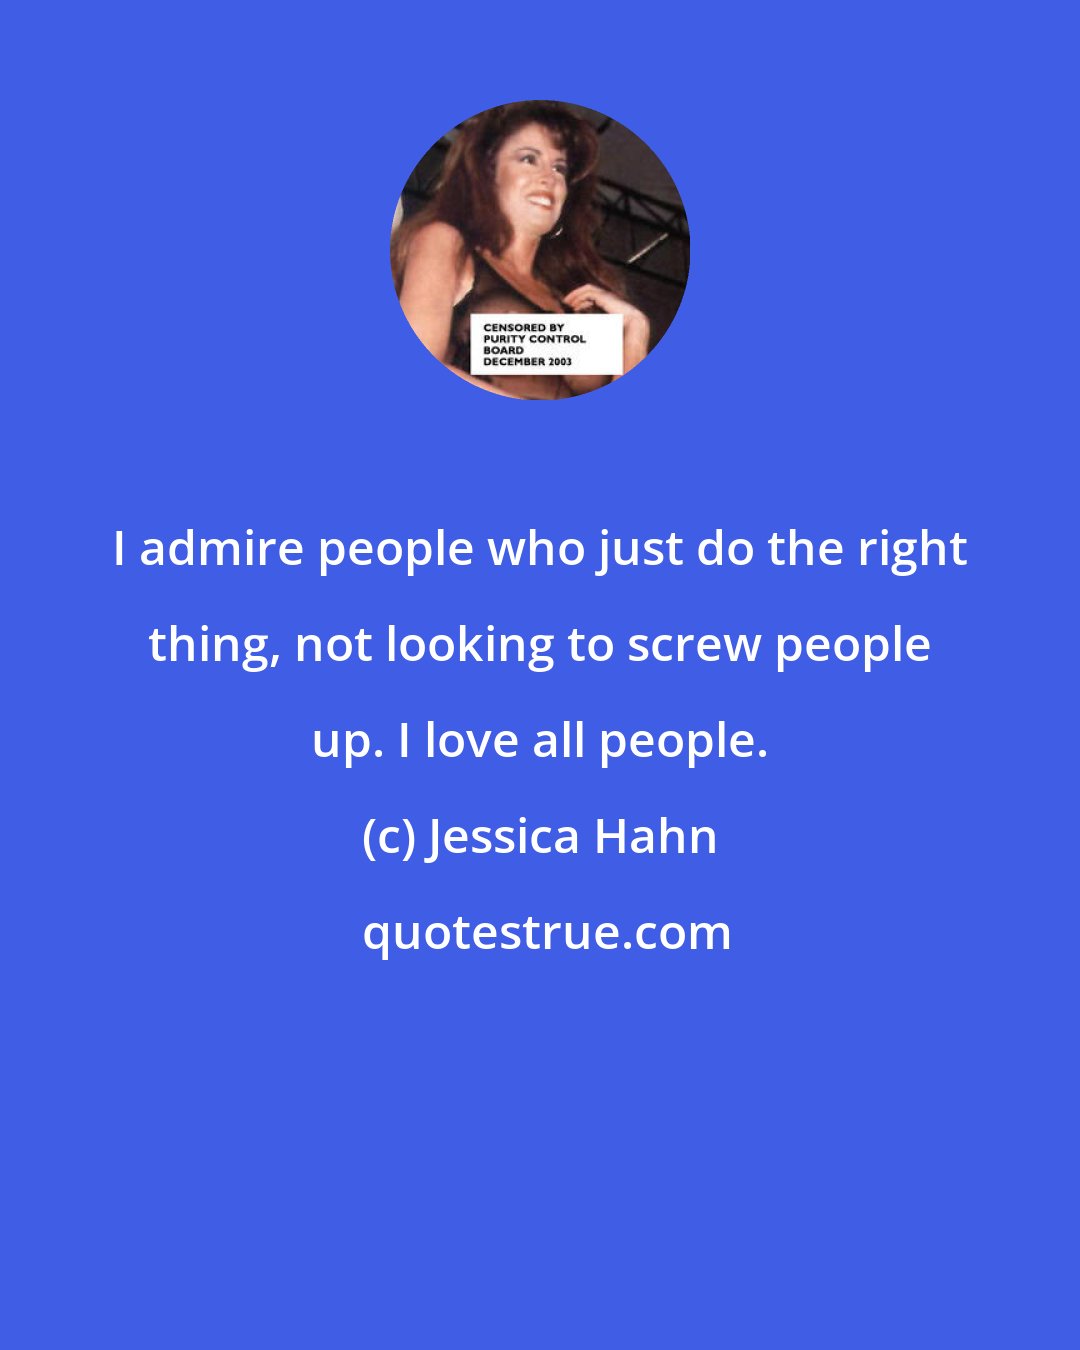 Jessica Hahn: I admire people who just do the right thing, not looking to screw people up. I love all people.